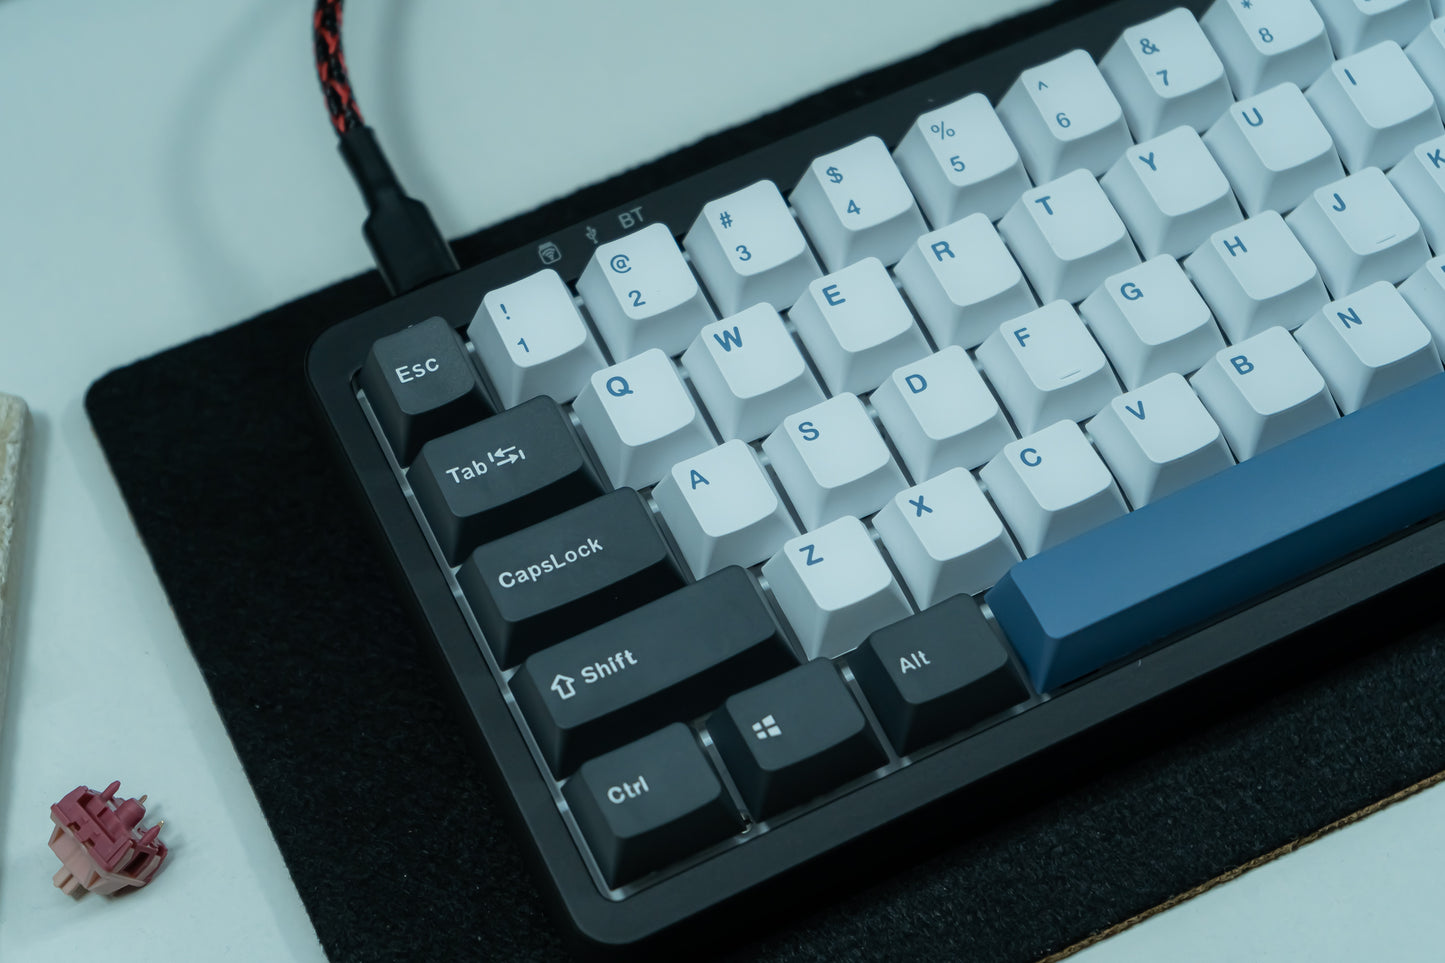 KF068 WITH PBT ARTIC KEYCAPS / WIRELESS ASSEMBLED 65% HOT-SWAP MECHANICAL KEYBOARD